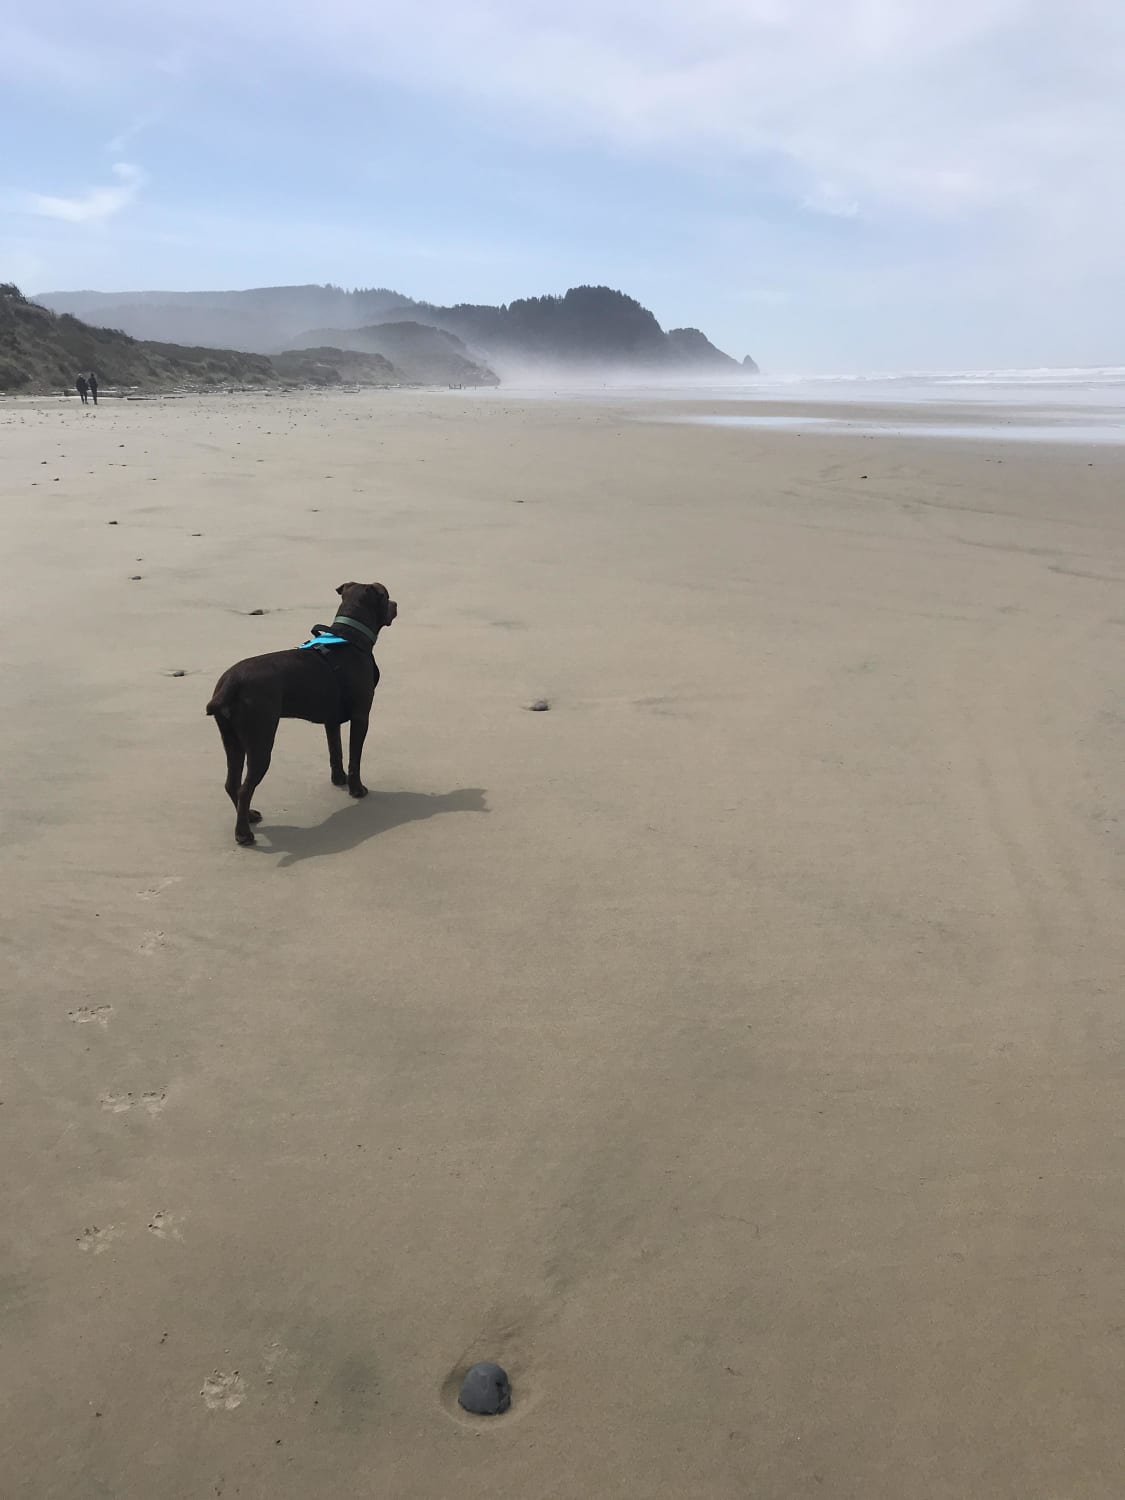 Called in sick to work. Took my newly adopted dog to the beach on a beautiful spring day.